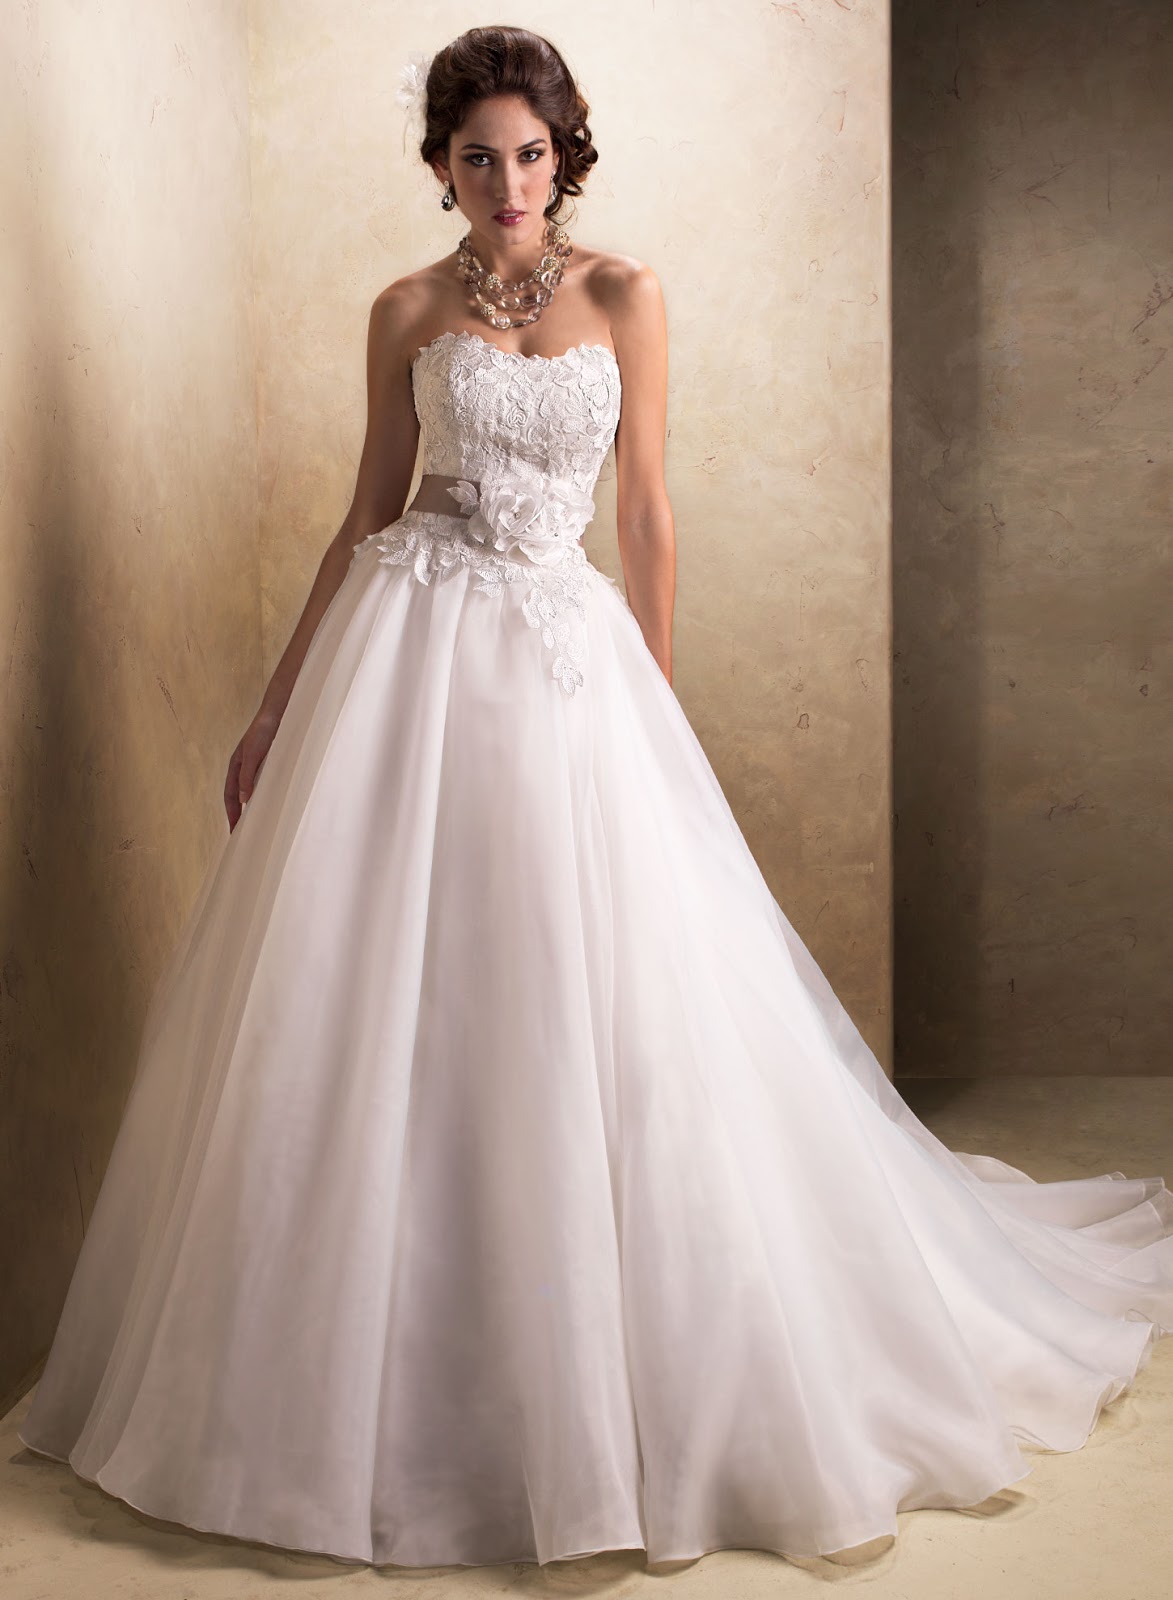 IN LOVE WITH BEAUTY: Maggie Sottero Wedding Dresses - part 1